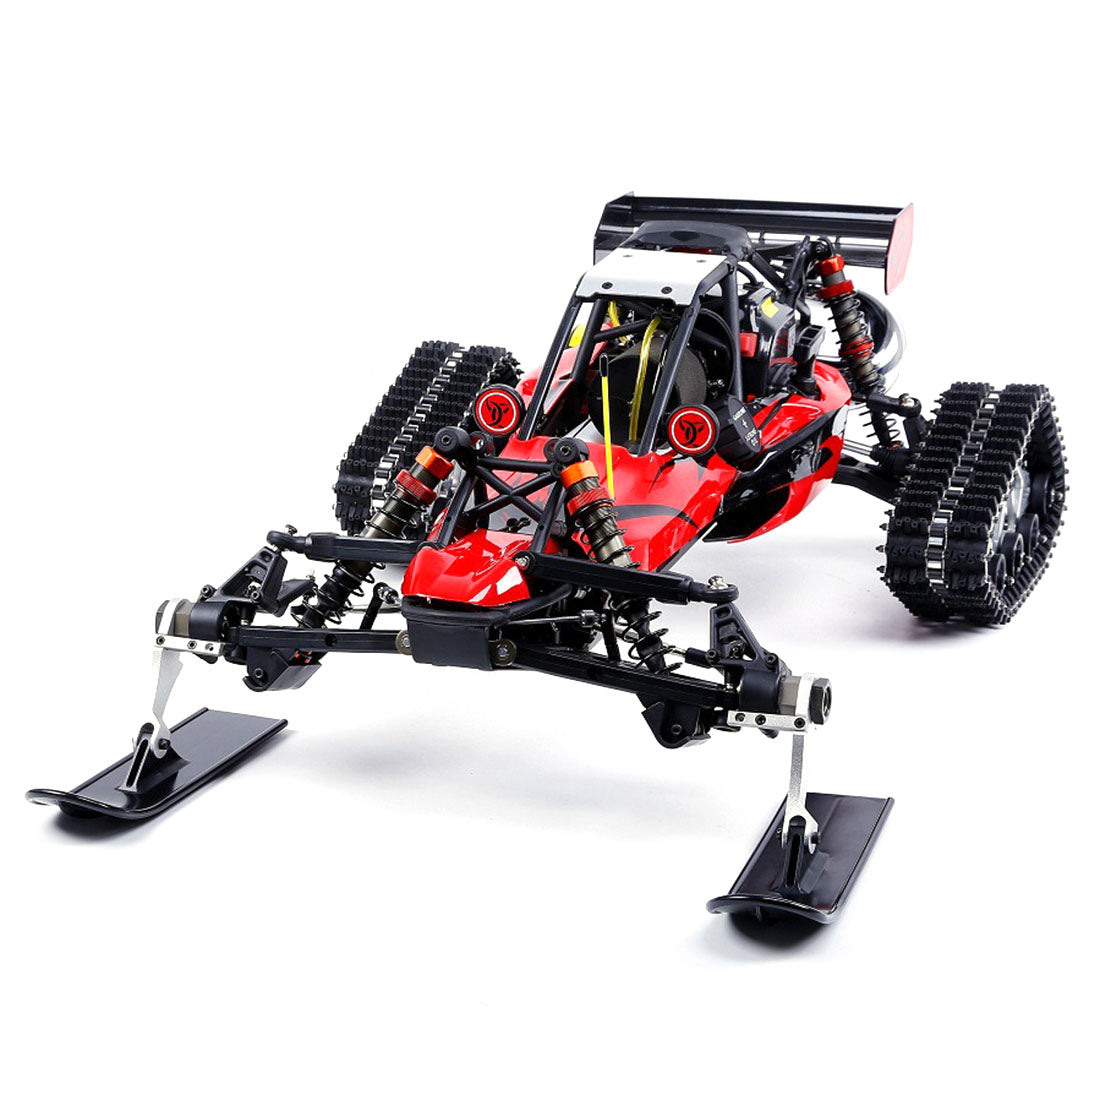 Rovan BAHA305AS Snow 1/5 2WD 2.4G RWD Gasoline Off-road Vehicle RC Model Car with 30.5cc Engine - RTR Version